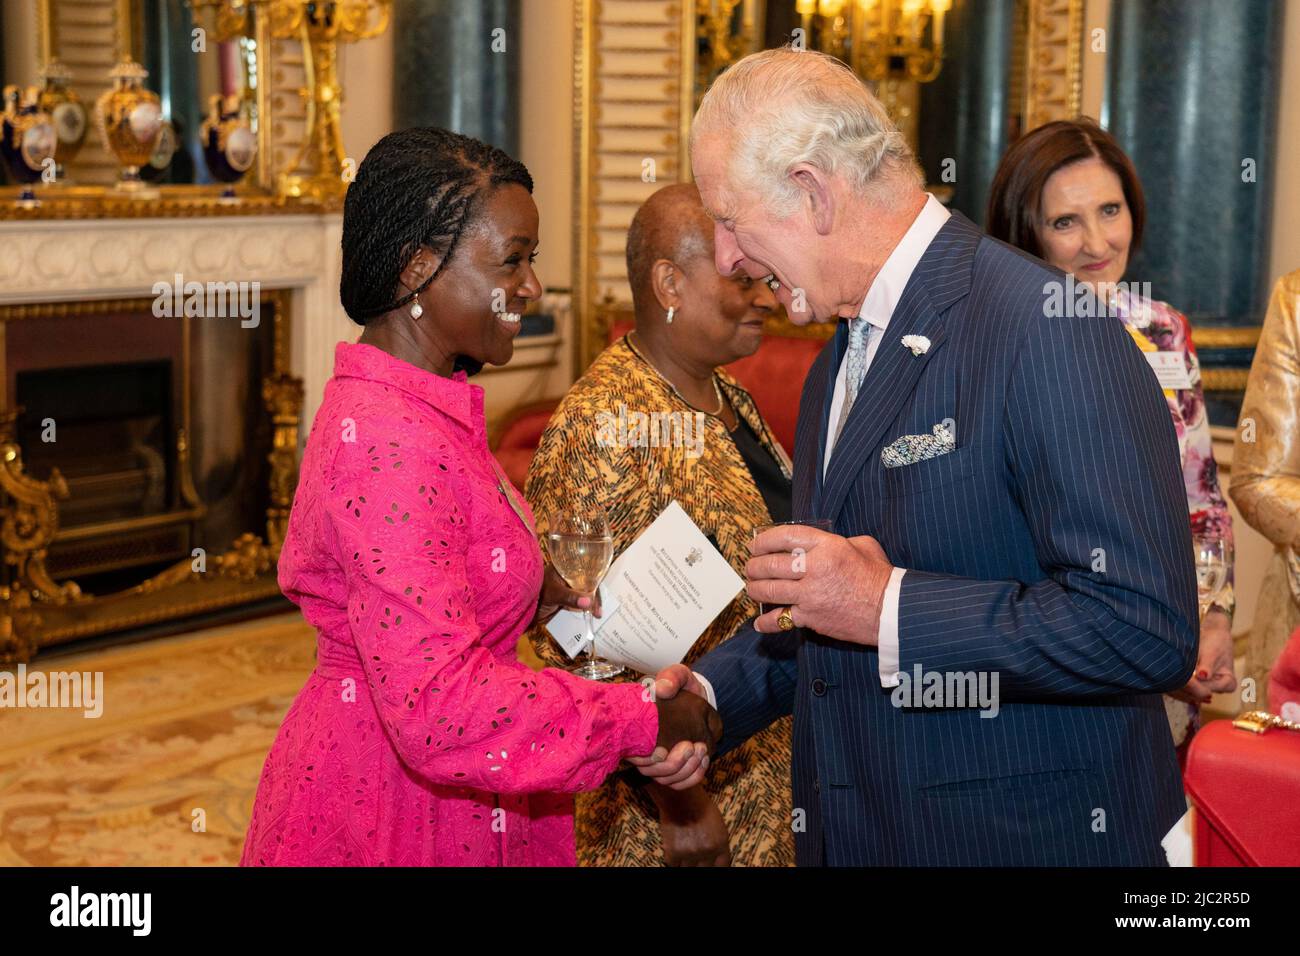 Britain's Prince Charles speaks with TV presenter Diane Louise Jordan, while he attends a reception celebrating the Commonwealth Diaspora of the United Kingdom, in London, Britain, June 9, 2022. Dominic Lipinski/PA Wire/Pool via REUTERS Stock Photo